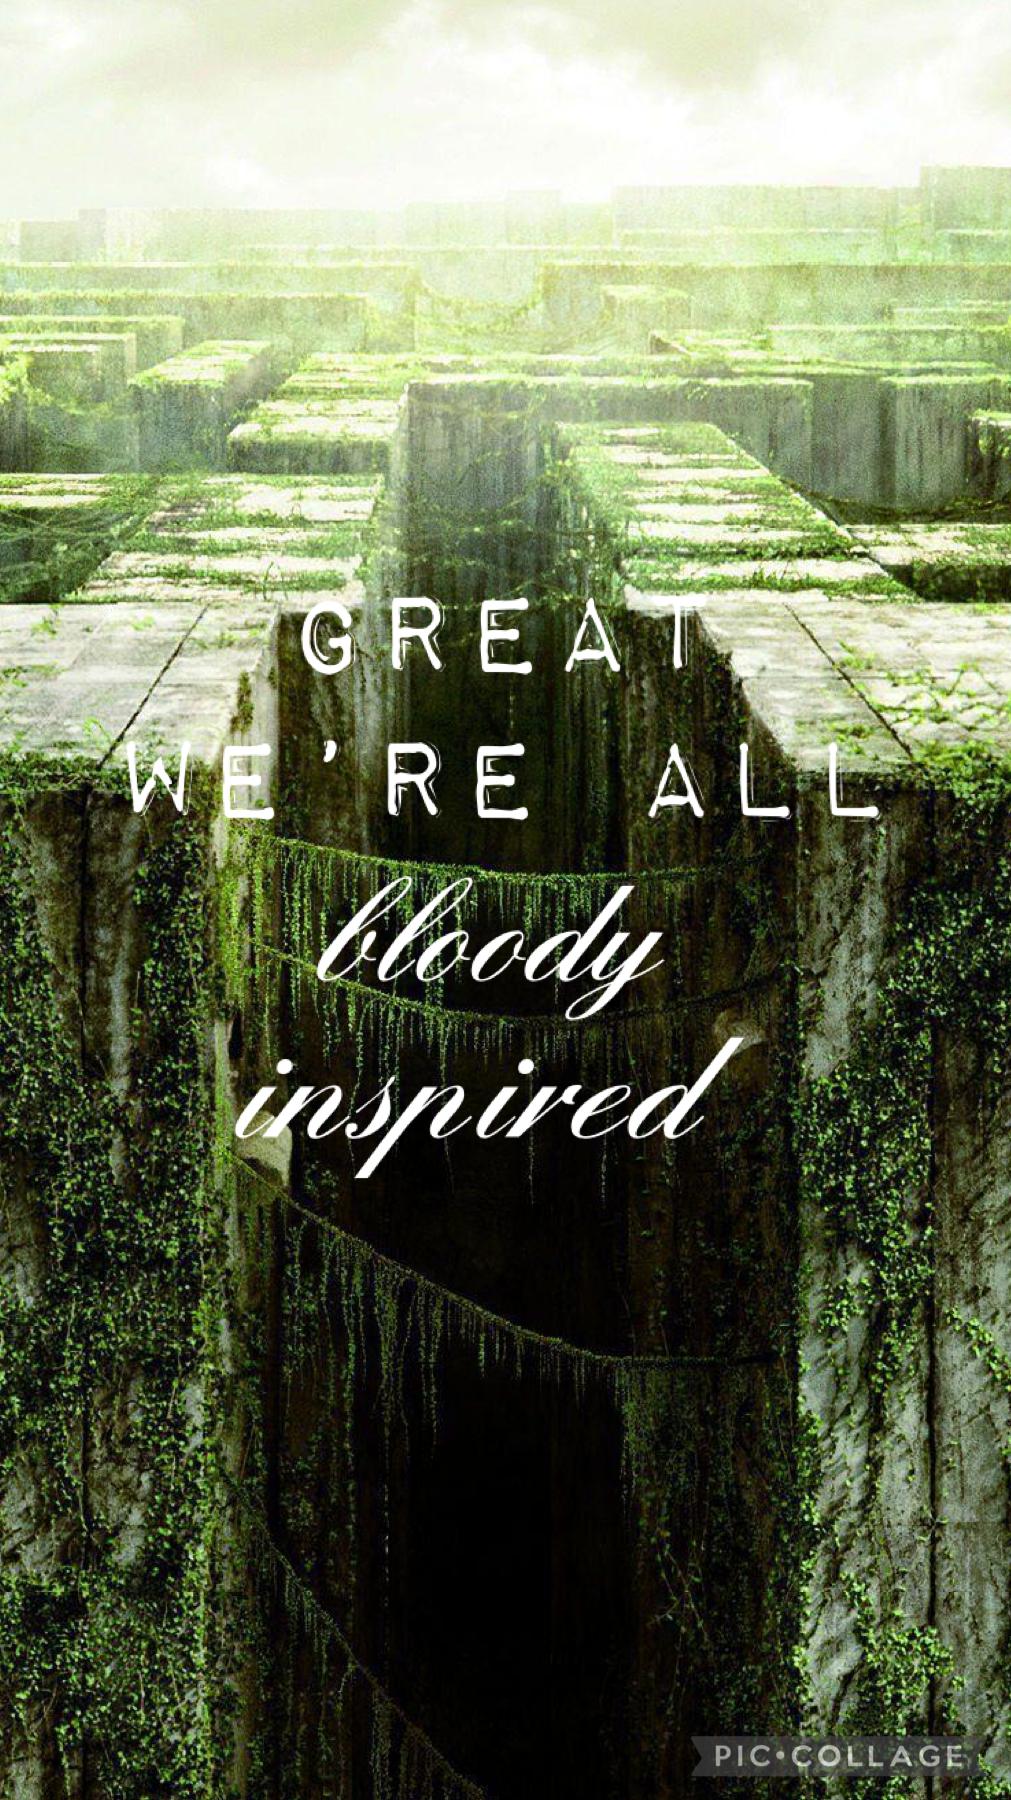 Idk if this counts as an inspirational quoted but whtever. Maze Runner. 💚🖤